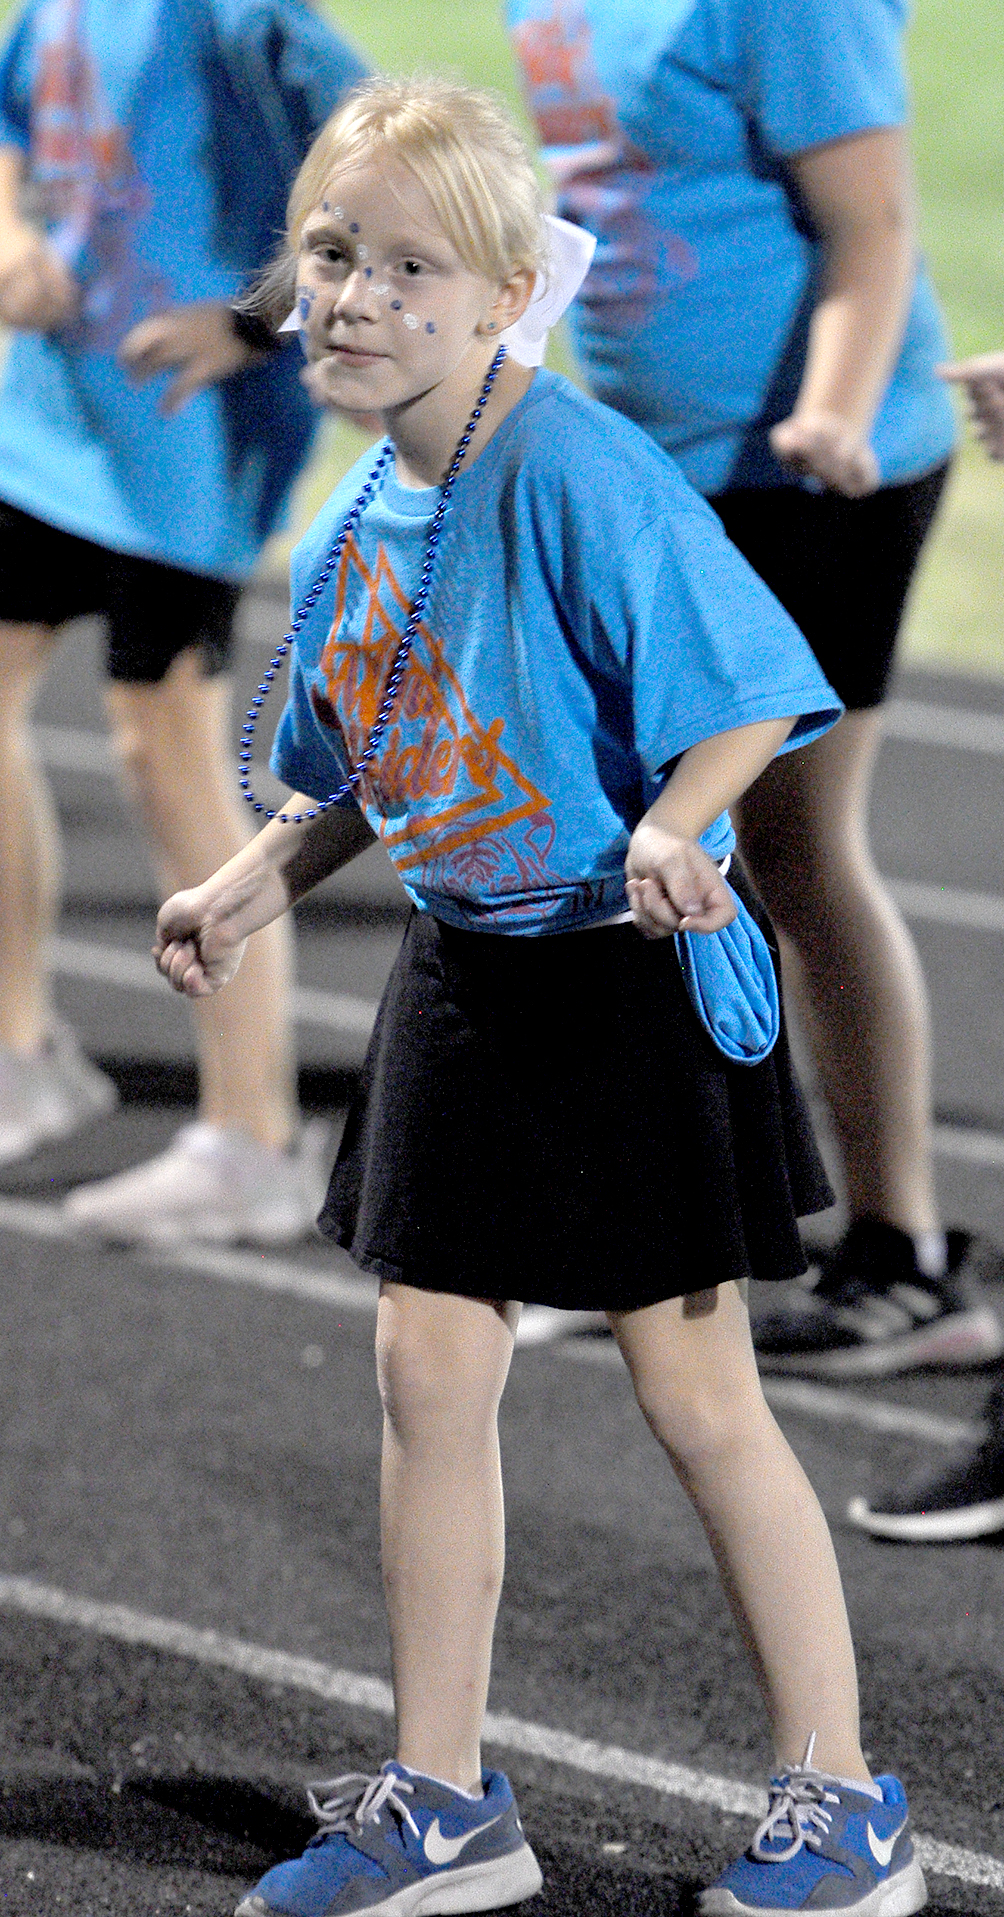 Kitlyn Snyder performing at the Hoxie football game